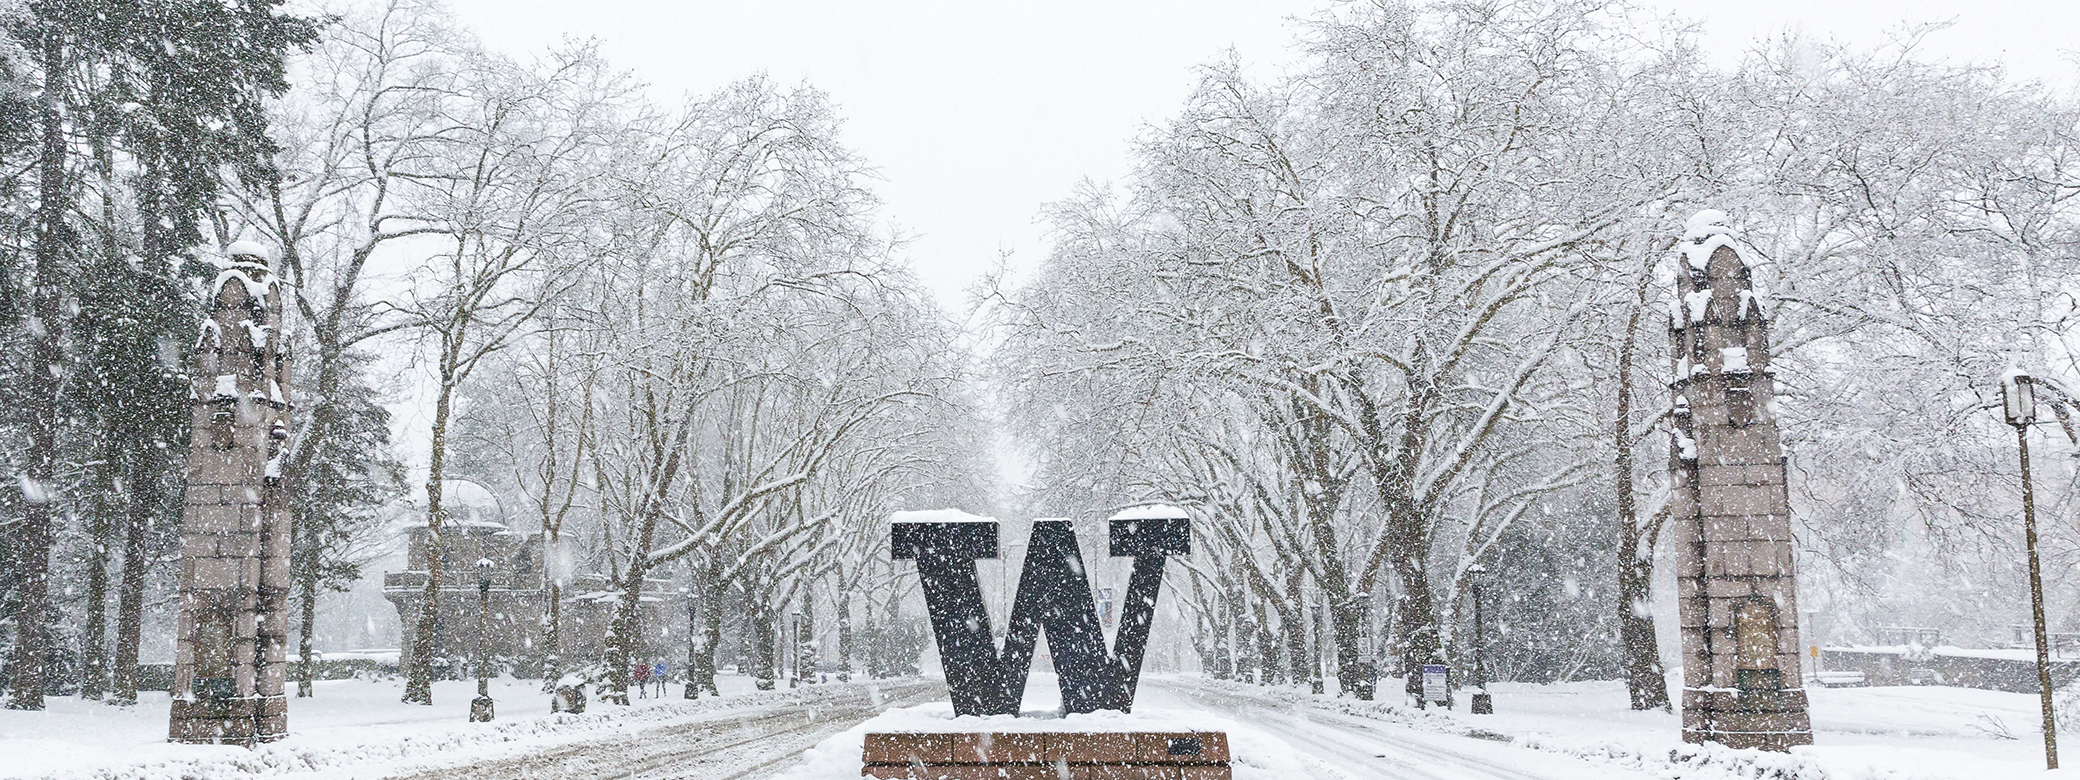 Snowy day with "W" sign at entrance to campus.